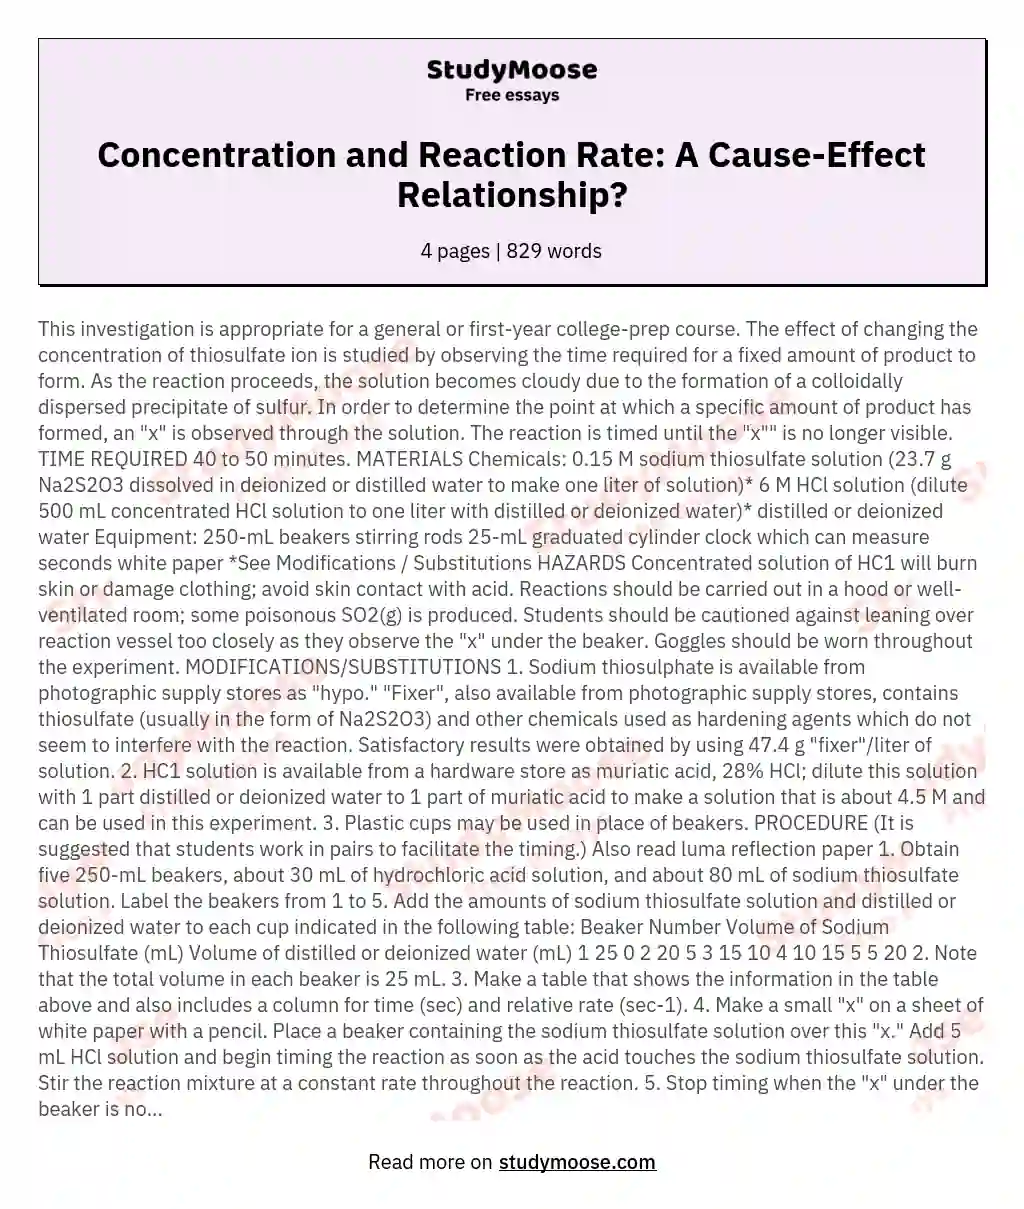 Concentration and Reaction Rate: A Cause-Effect Relationship?